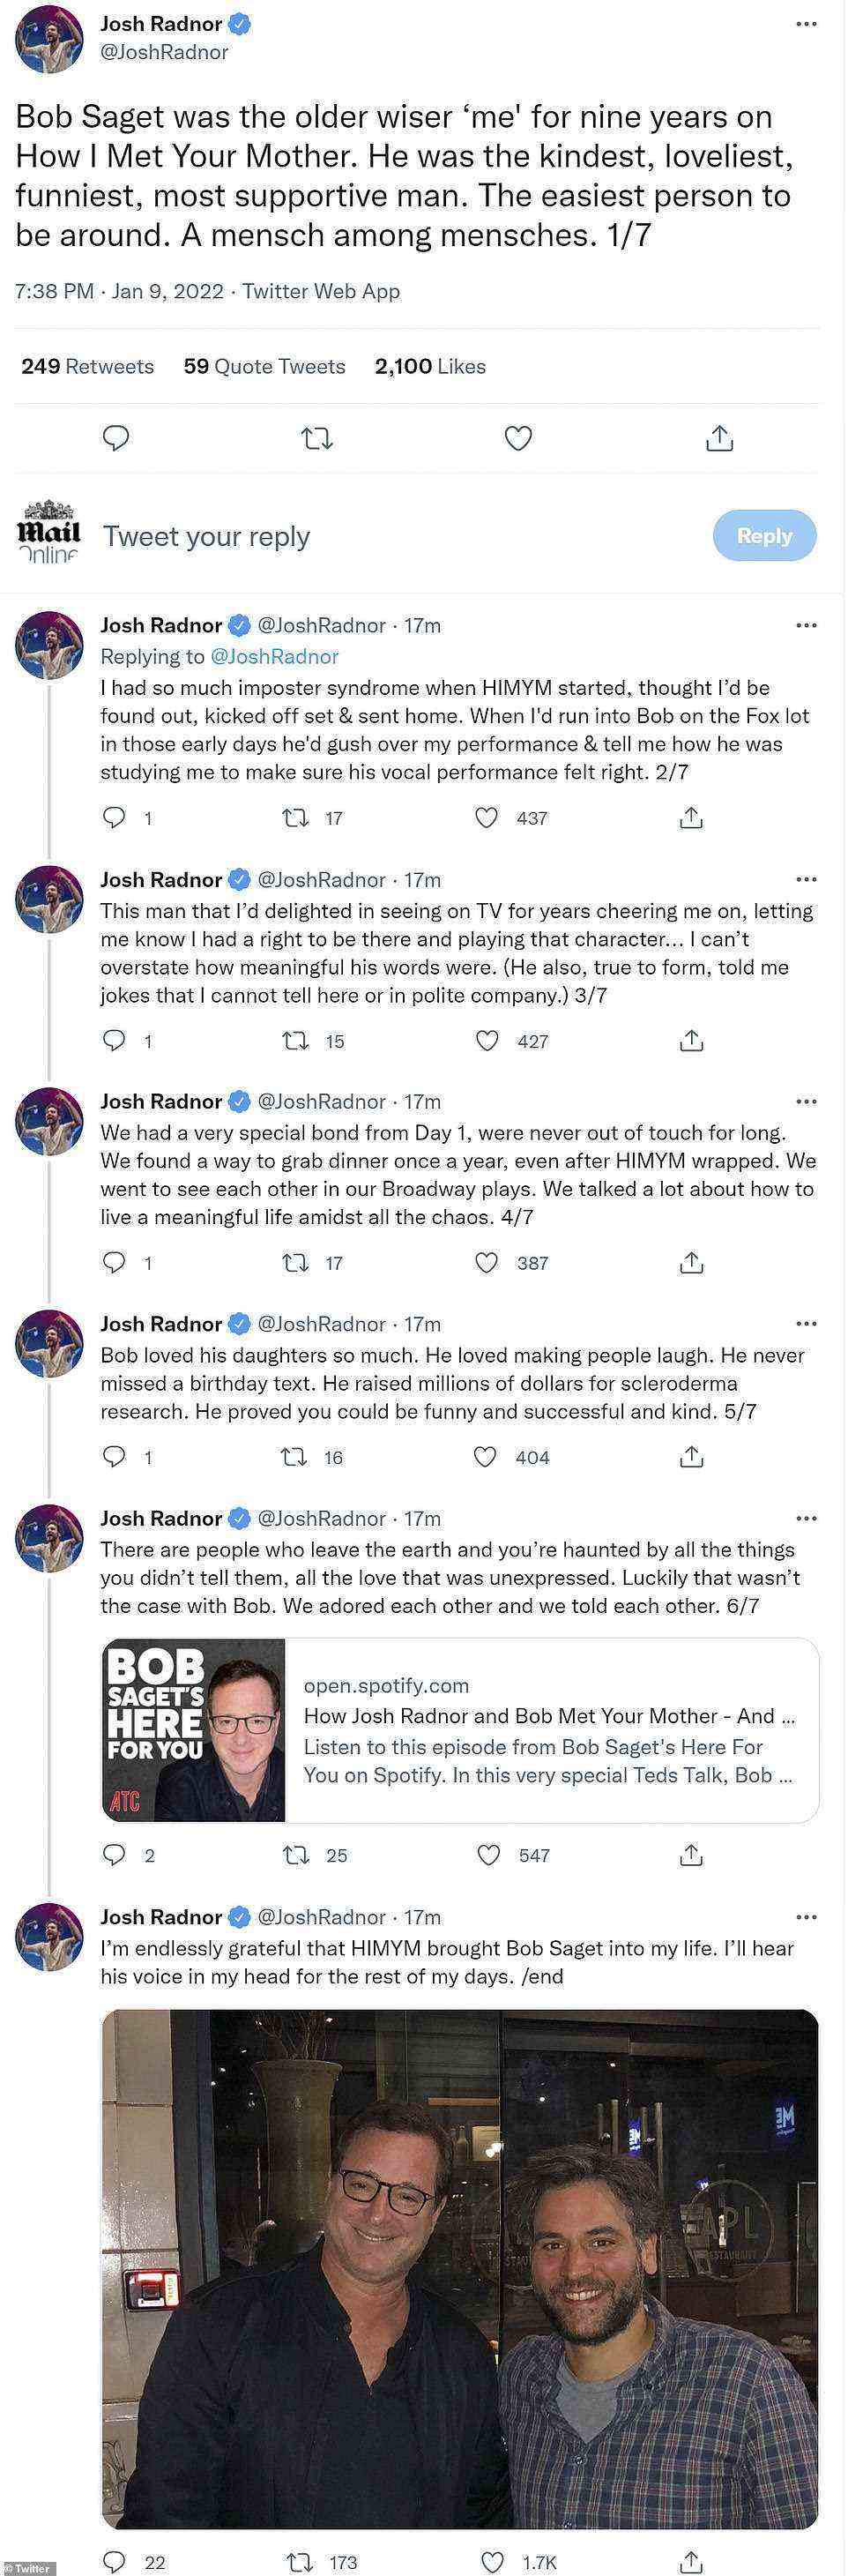 Inspired: Josh Radnor eulogized Saget (who narrated How I Met Your Mother as an older version of his character) in a Twitter thread, culminating with a smiley photo of the two. Like so many others, he described his friend as 'the kindest, loveliest, funniest, most supportive man' and a 'mensch among mensches'